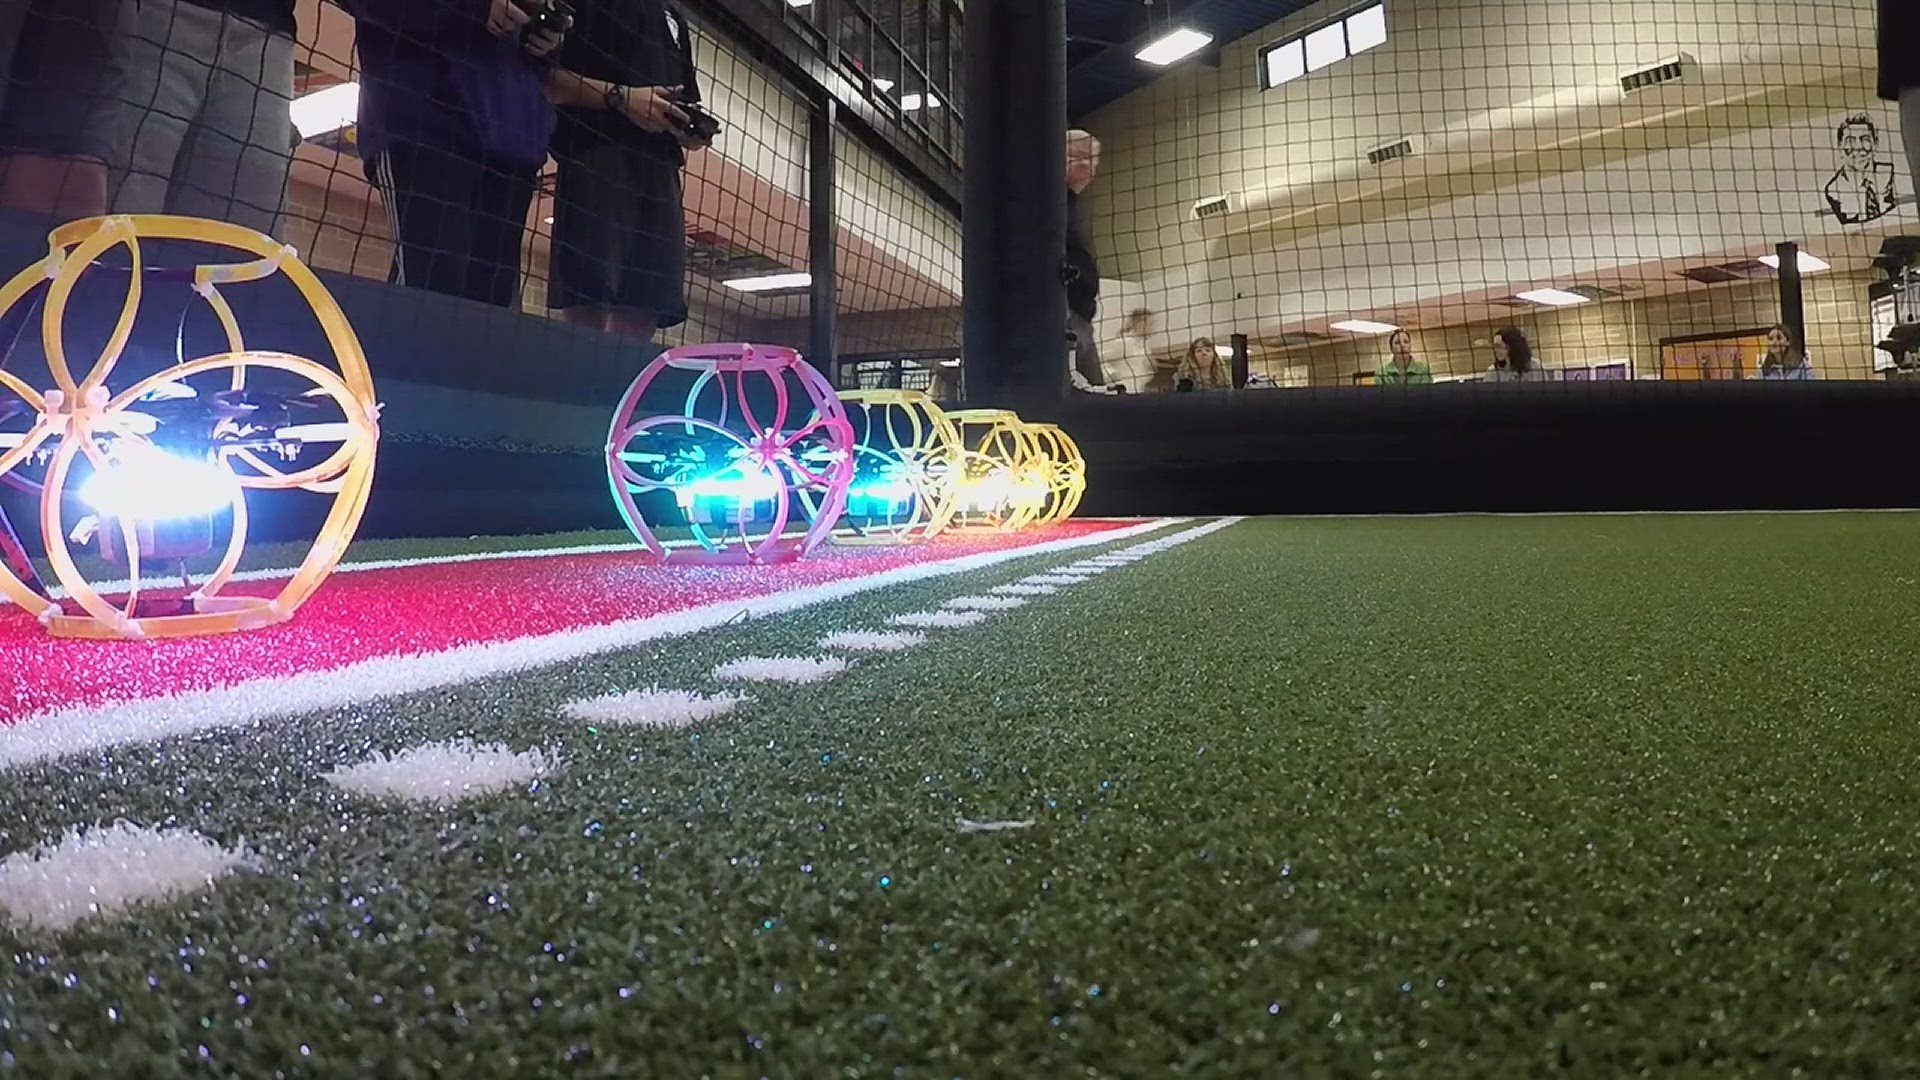 Drone soccer is new this year at Dixon High School and Reagan Middle School, but the students are already set to compete in the national championship this weekend.